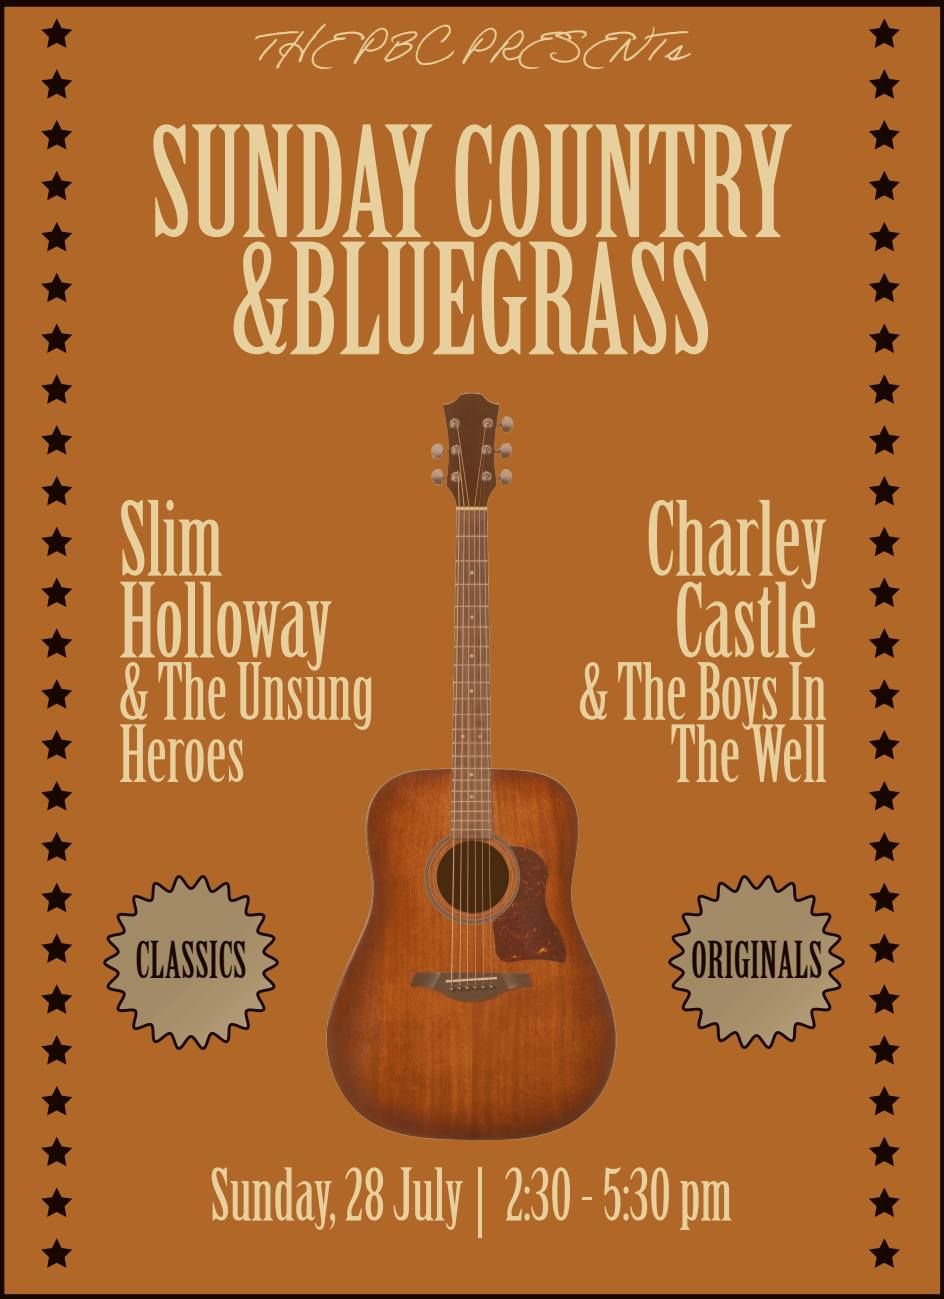 Sunday Country and Bluegrass at the PBC